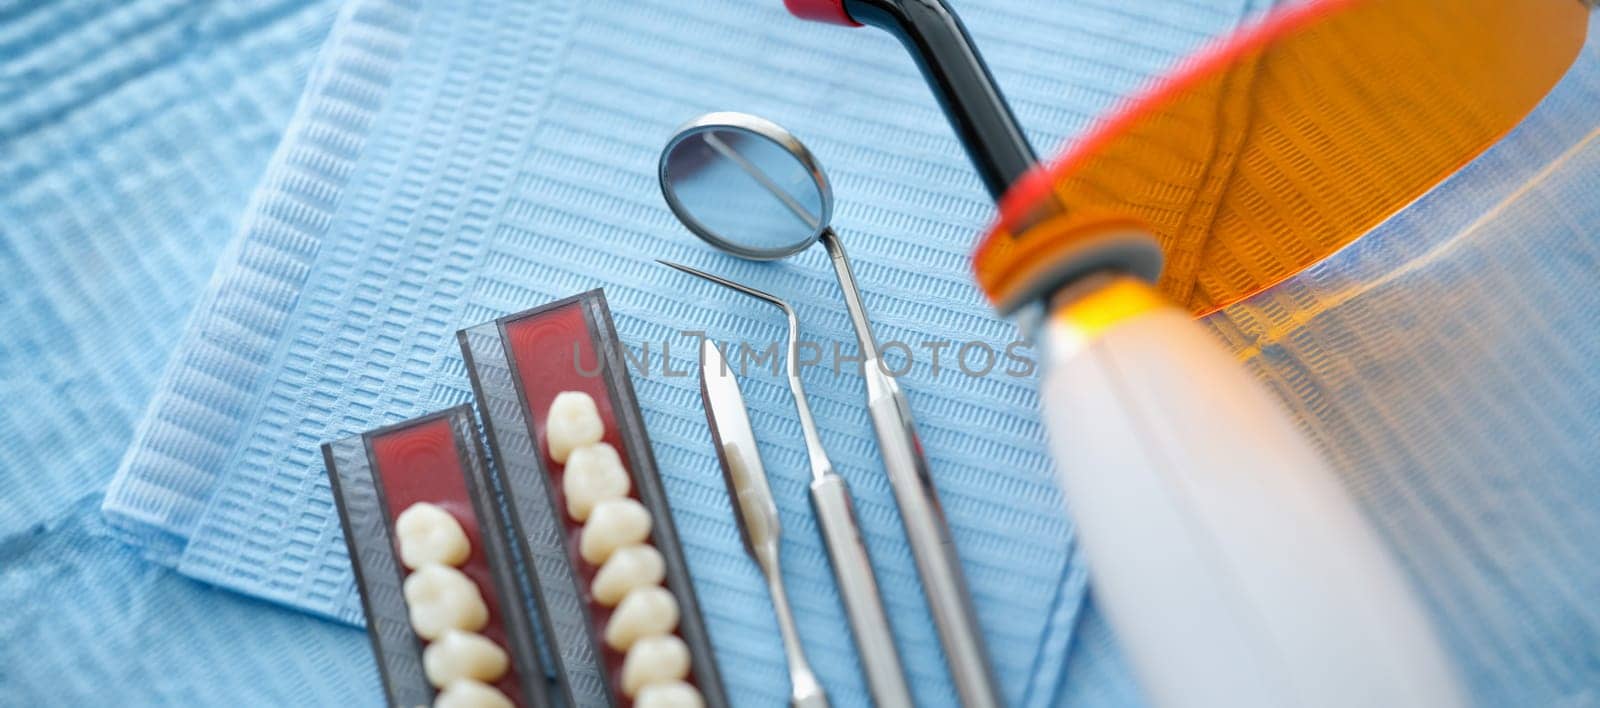 Dental instruments and dentures lying on sterile medical napkin in clinic closeup by kuprevich